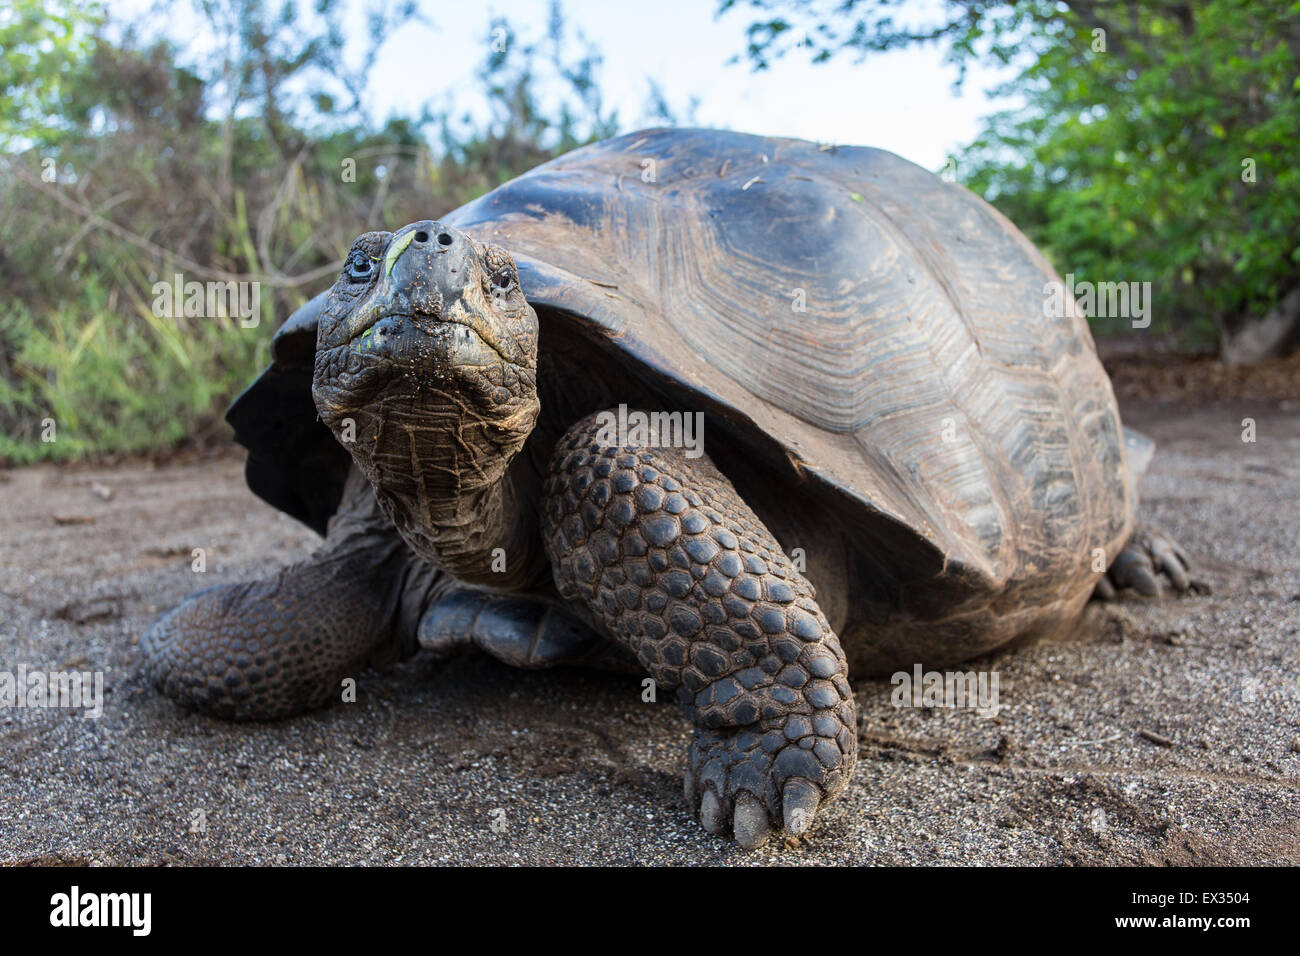 A Galapagos Giant Tortoise is large enough to block a hiking trail on Isla Isabela. Stock Photo